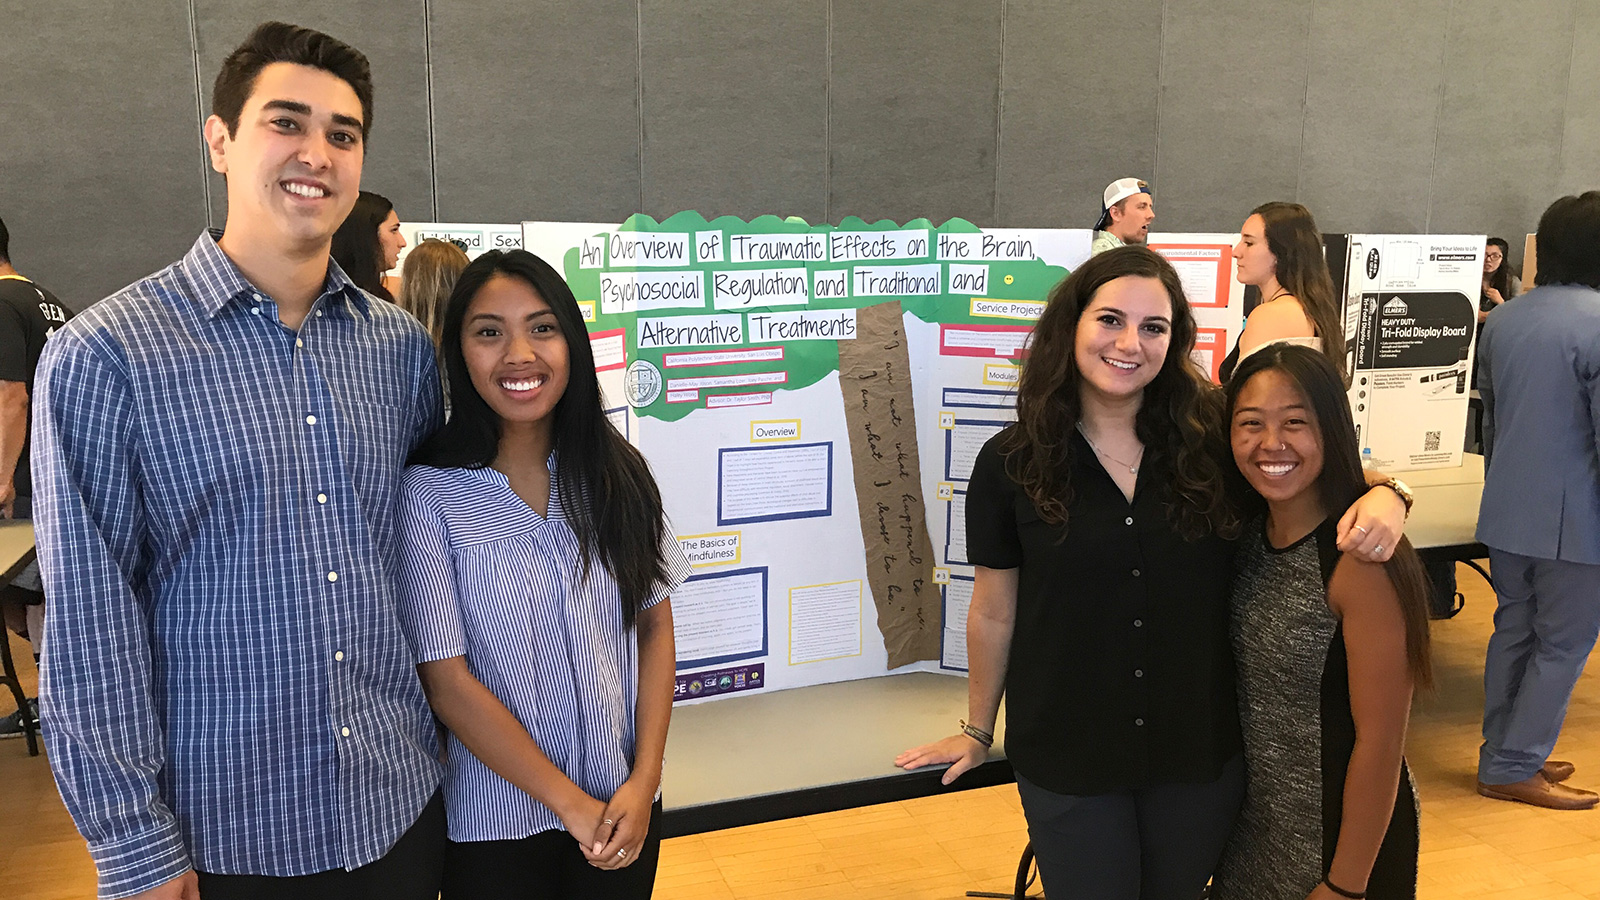 Psychology students presenting research project findings